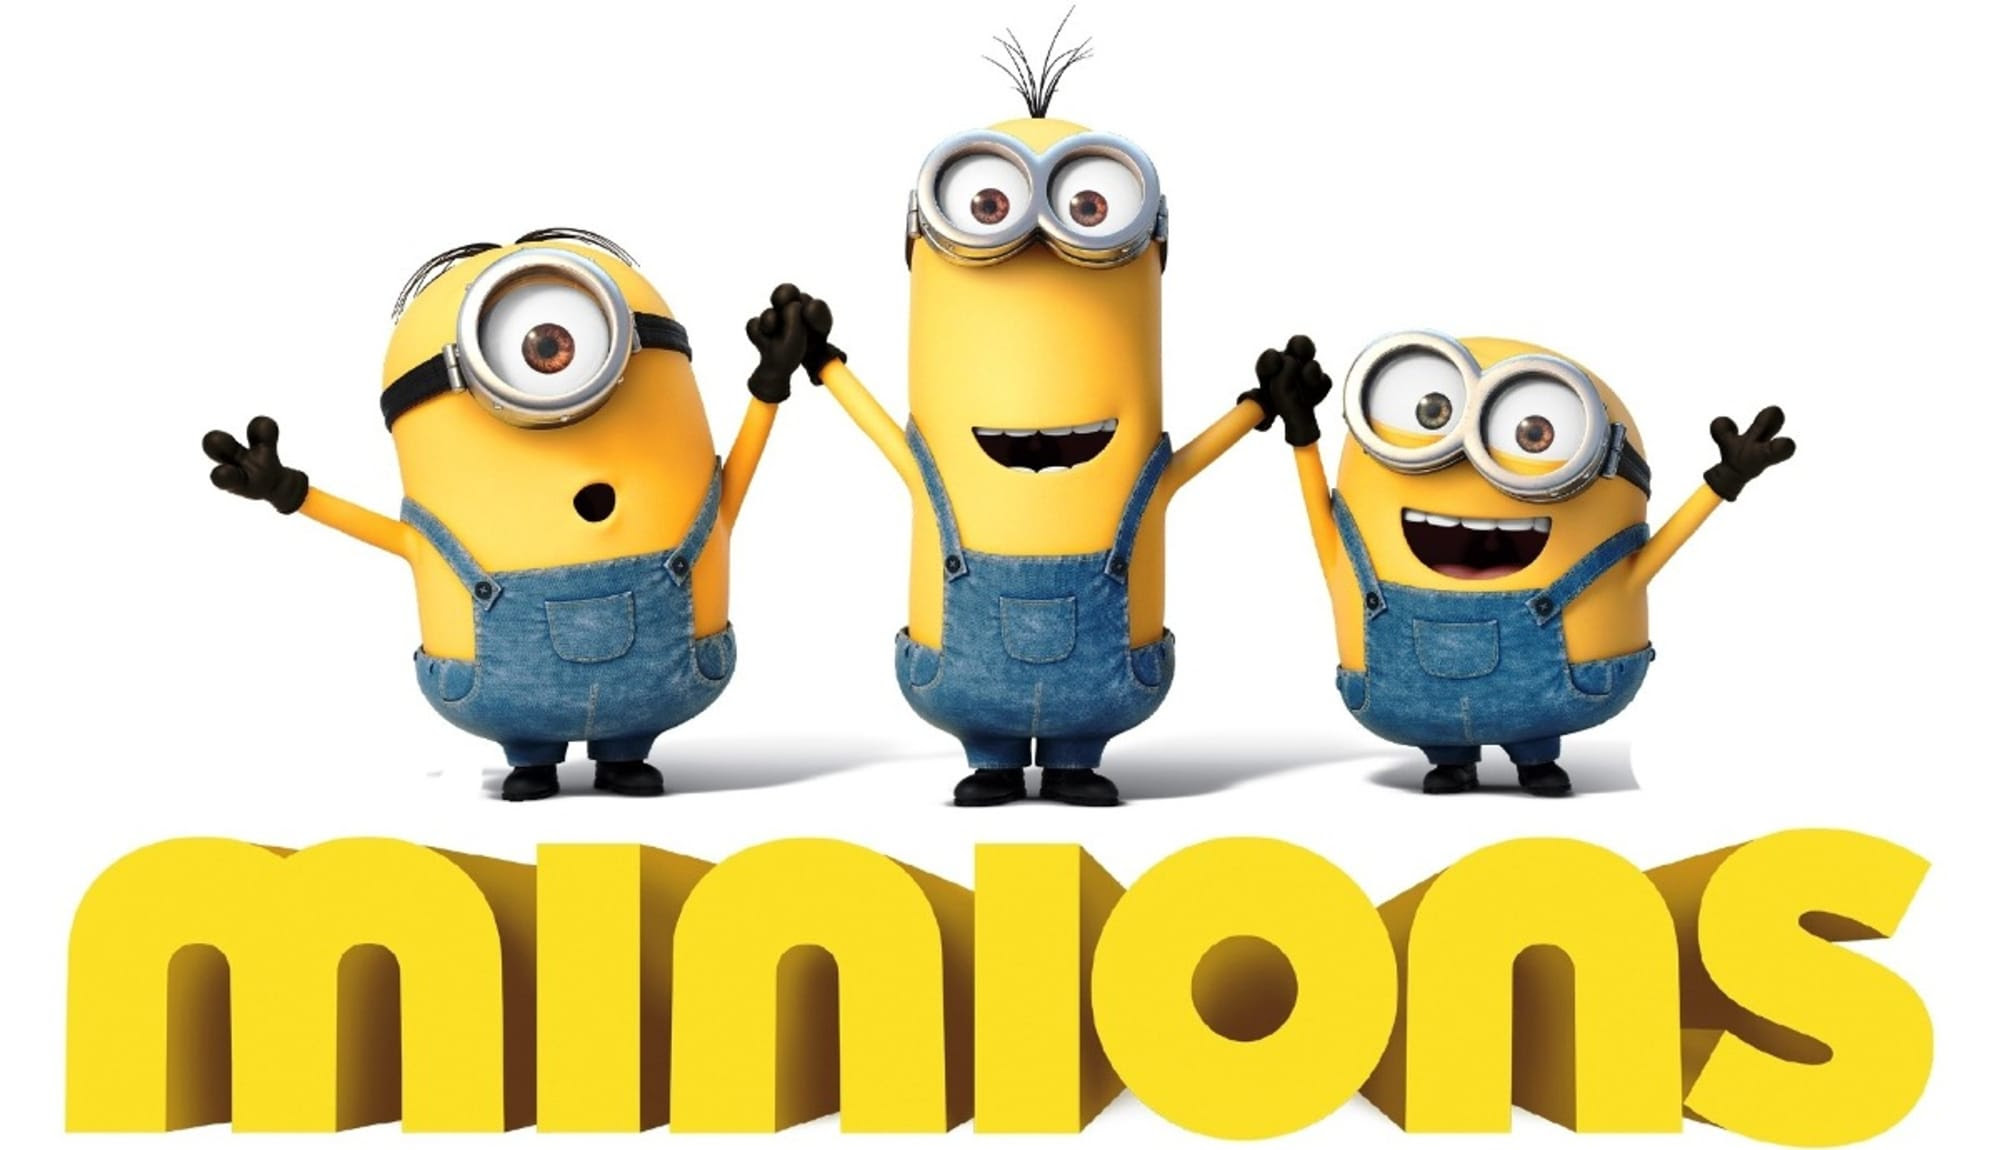 Minions, the Despicable Me spinoff, is now on Netflix